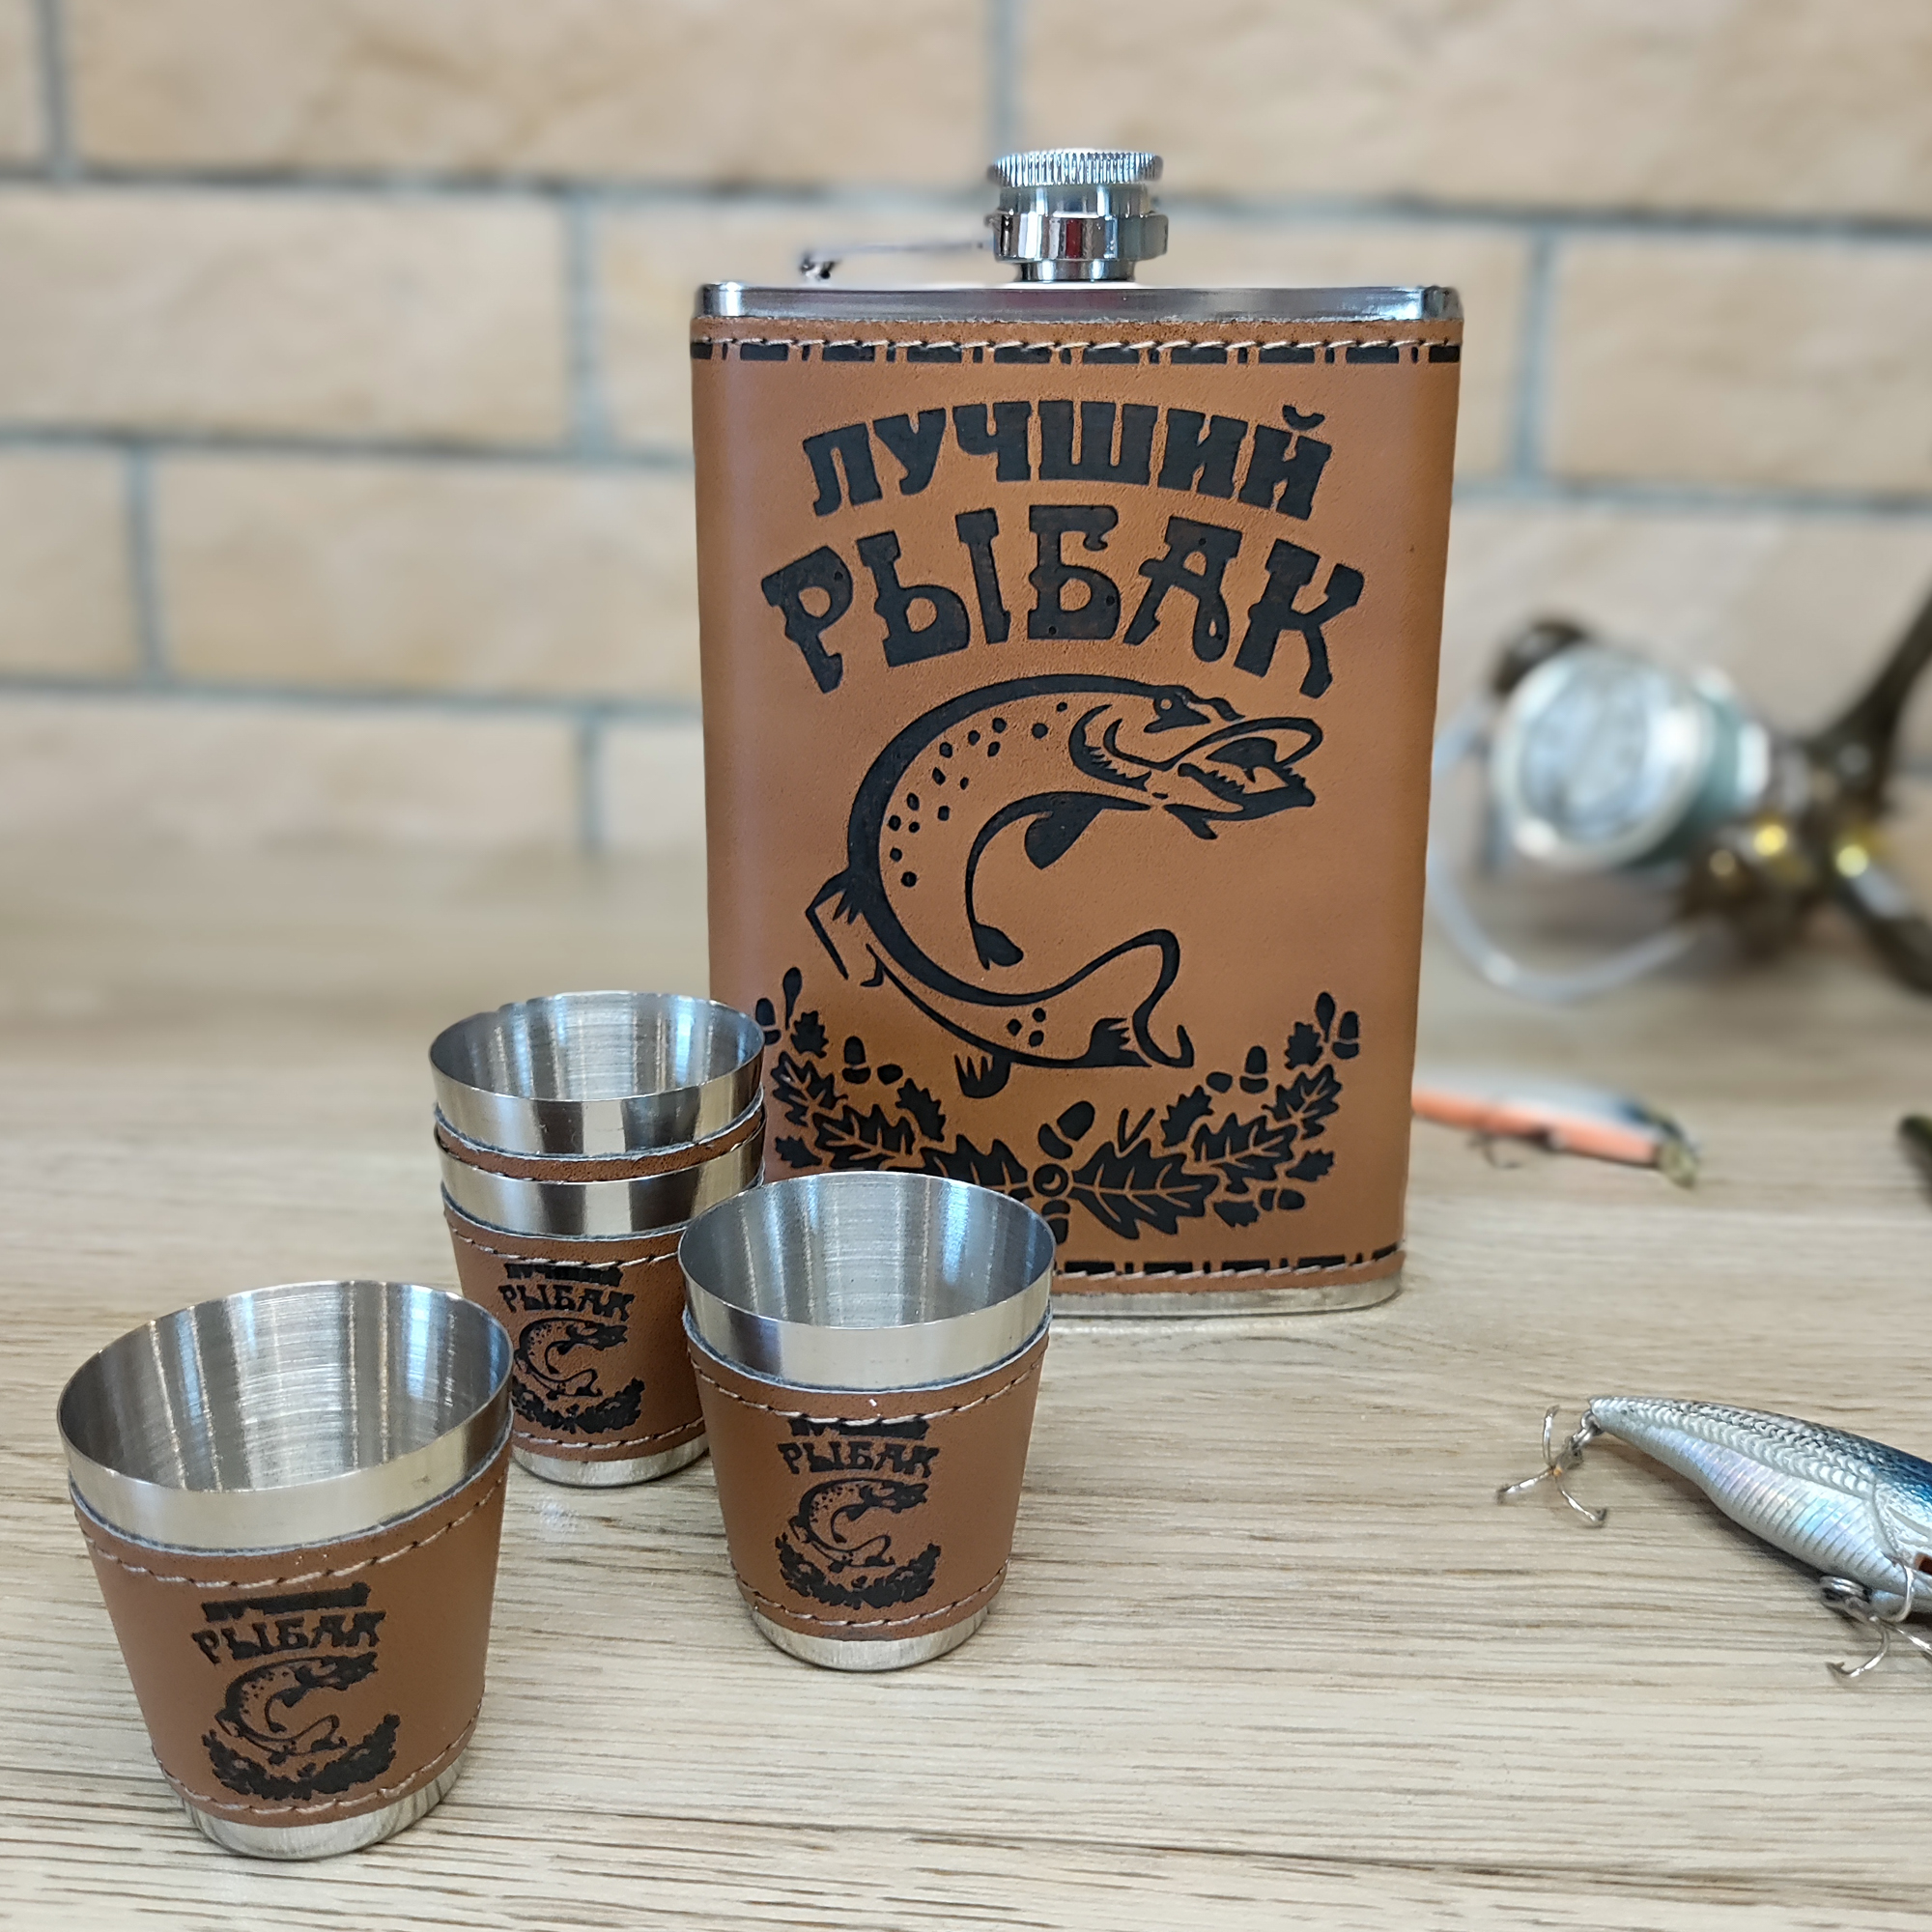 The Best Fisherman Stainless Steel Souvenir Flask Set